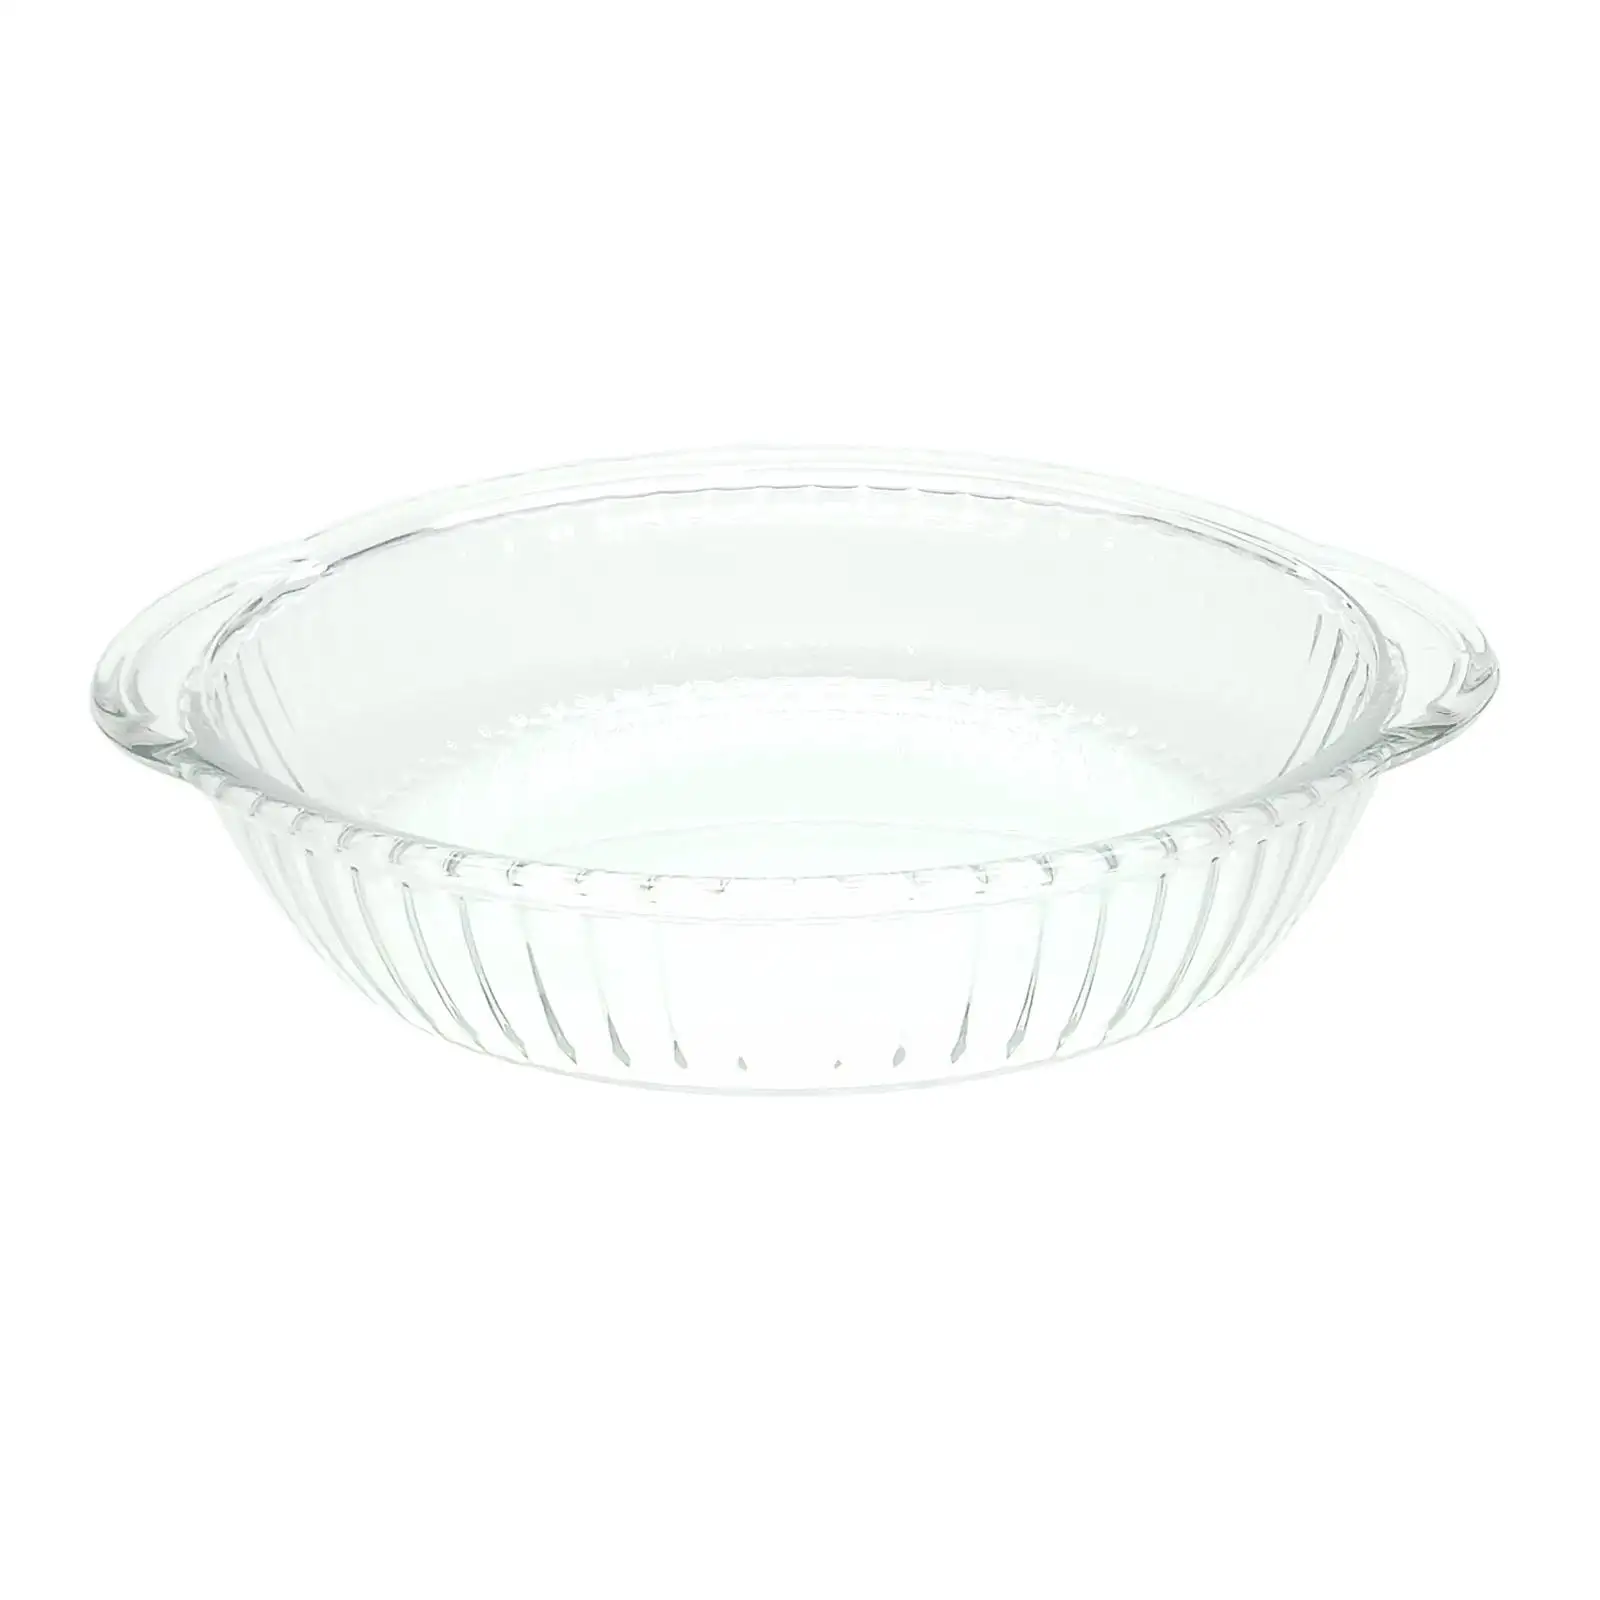 Round Clear Glass Sempre Tempered Glassware Heatproof Fluted Pie Dish with External Dimensions 30.5x27.6x6.1cm